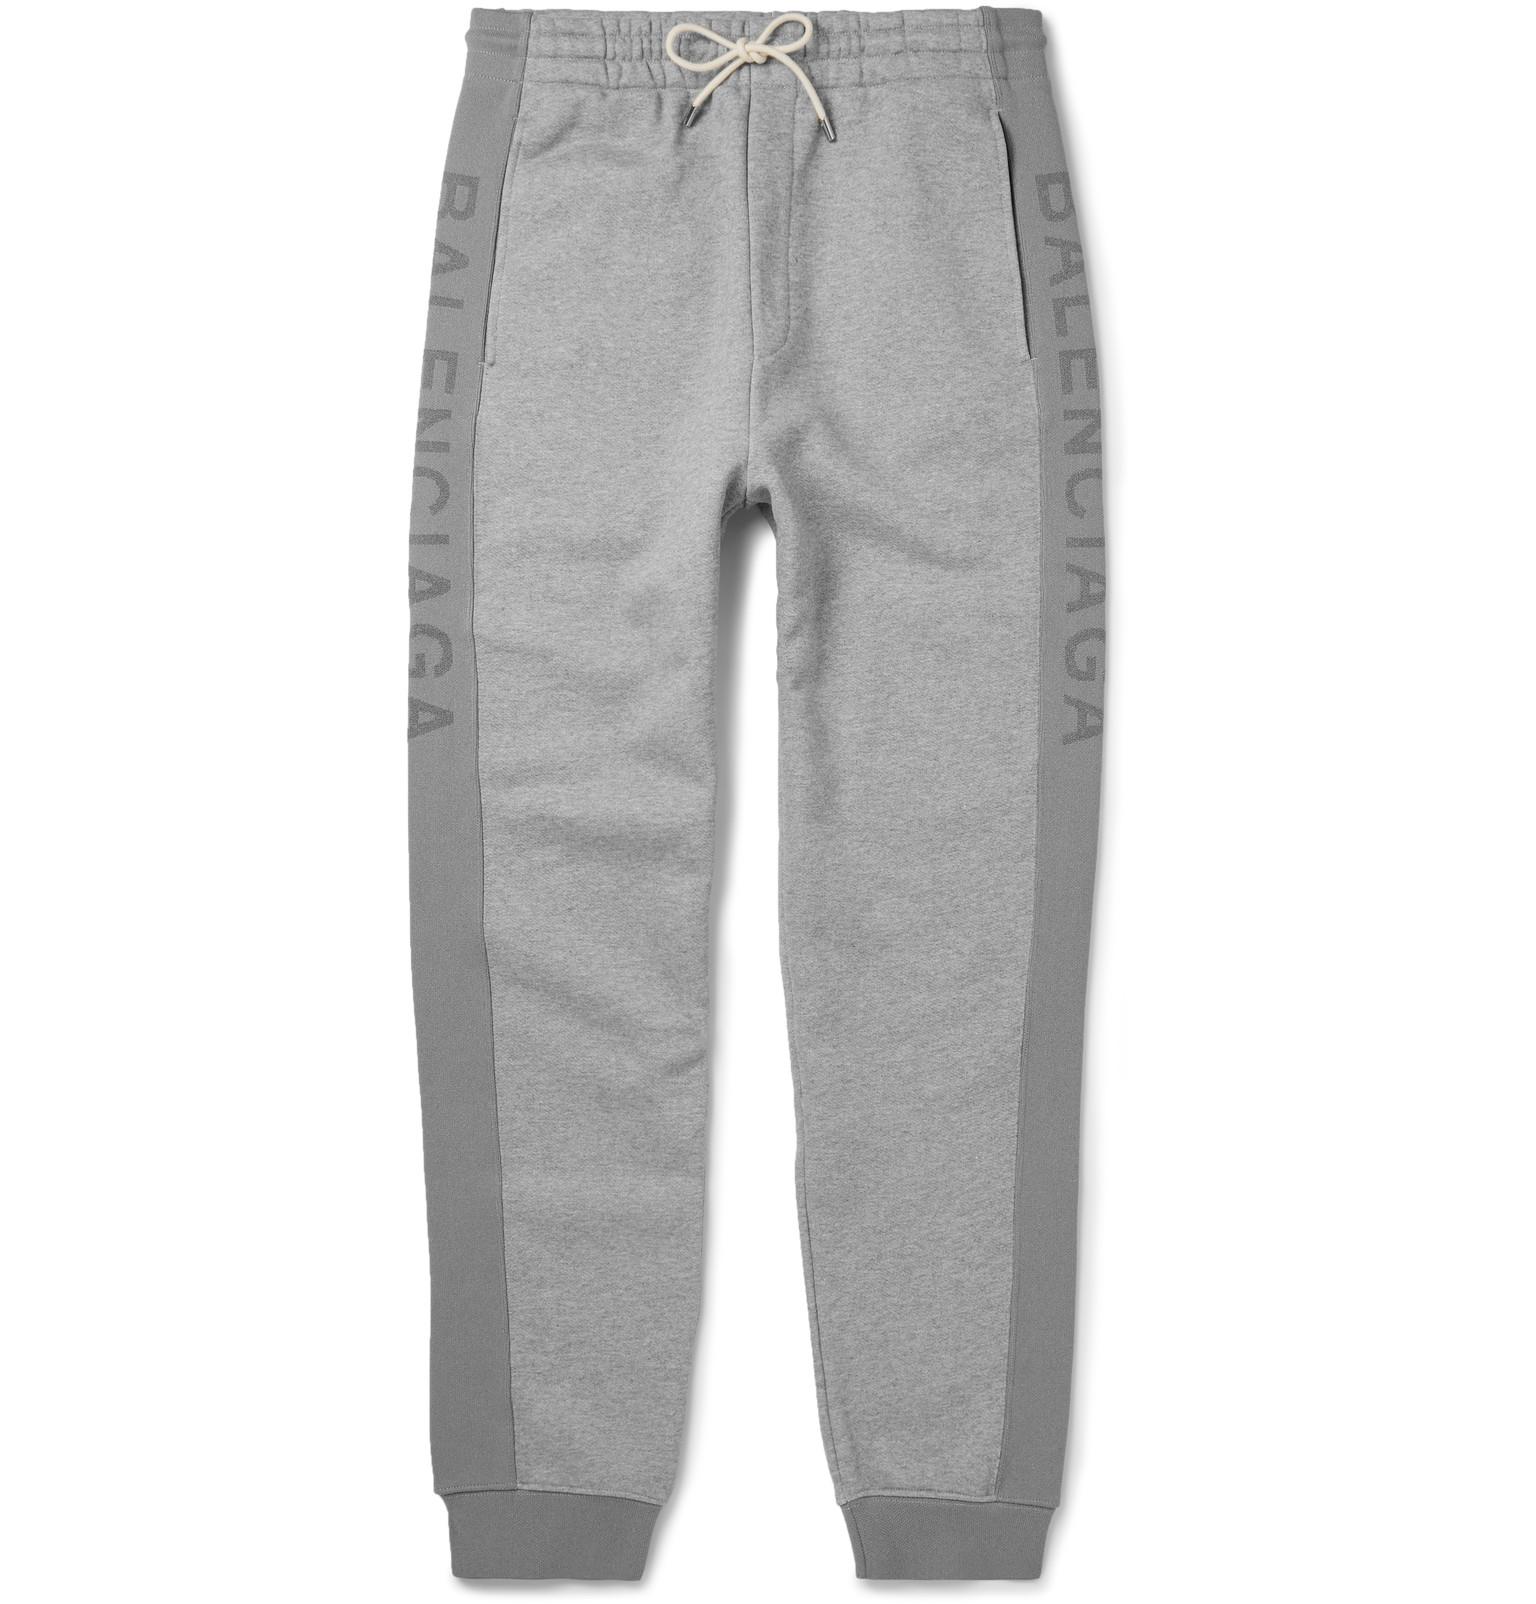 Balenciaga Slim-fit Tapered Fleece-back Cotton-jersey Sweatpants in ...